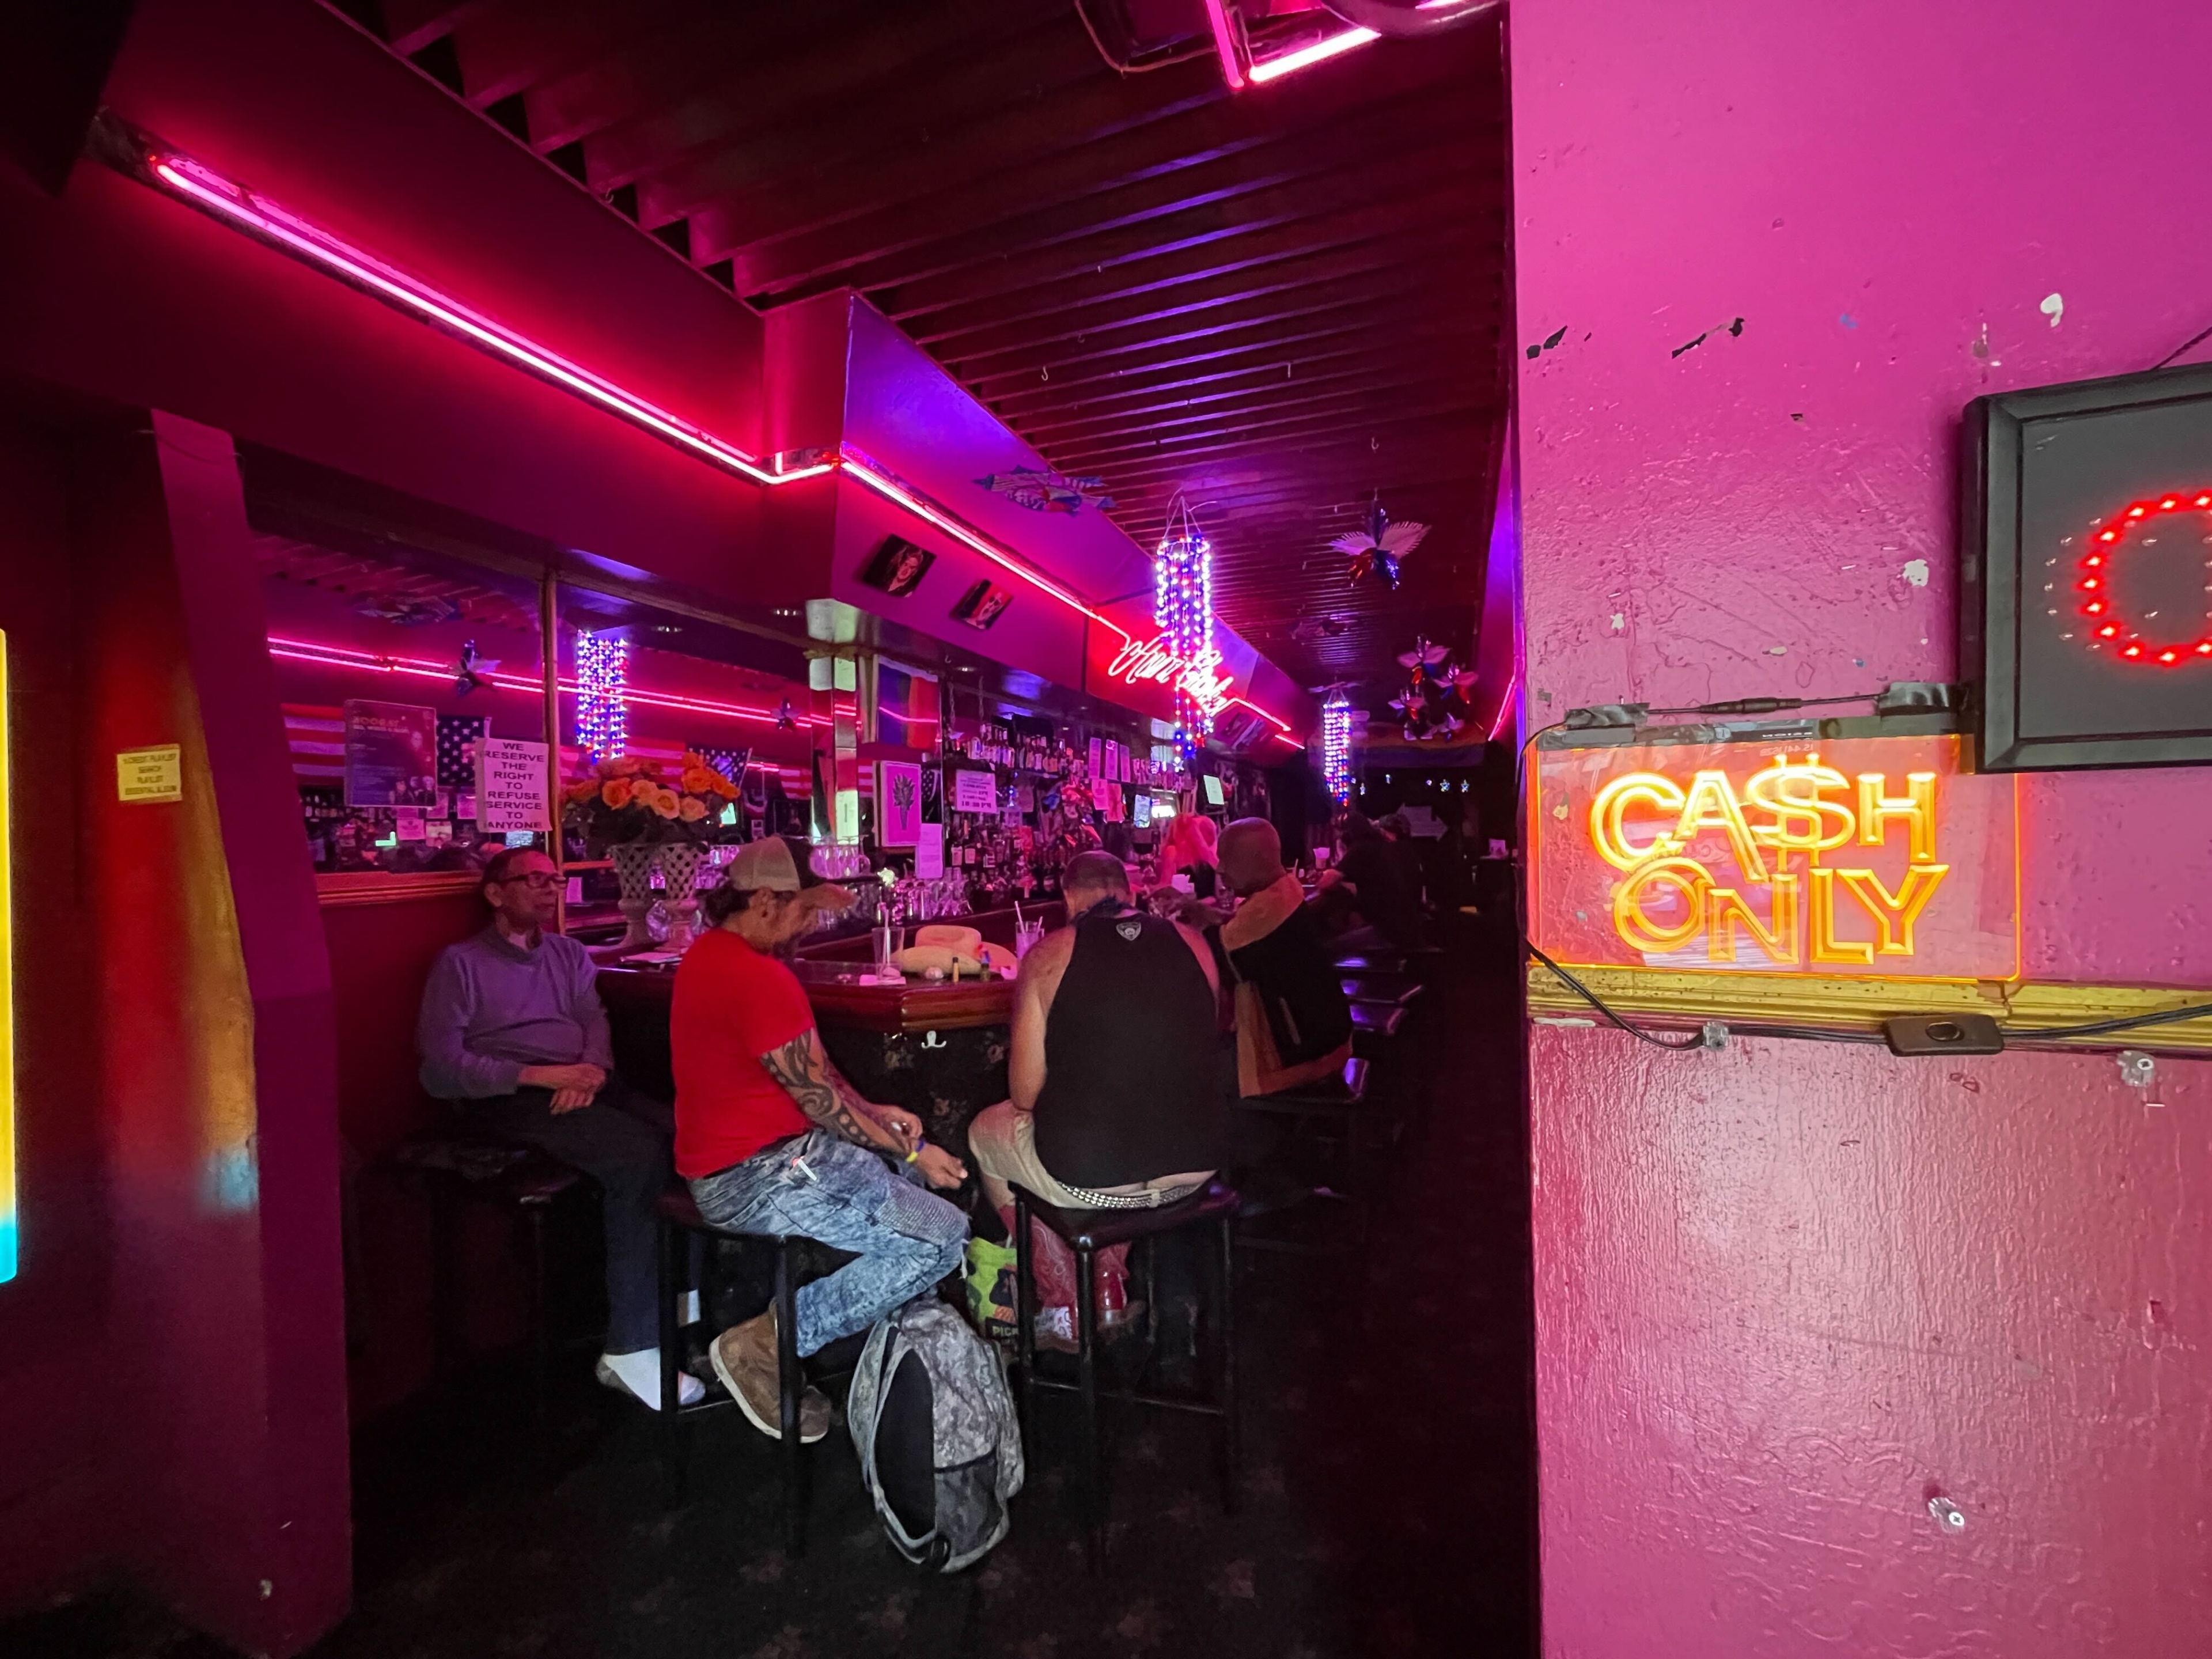 Peeking through the door of a brightly colored bar, with a &quot;cash only&quot; sign outside the entrance.